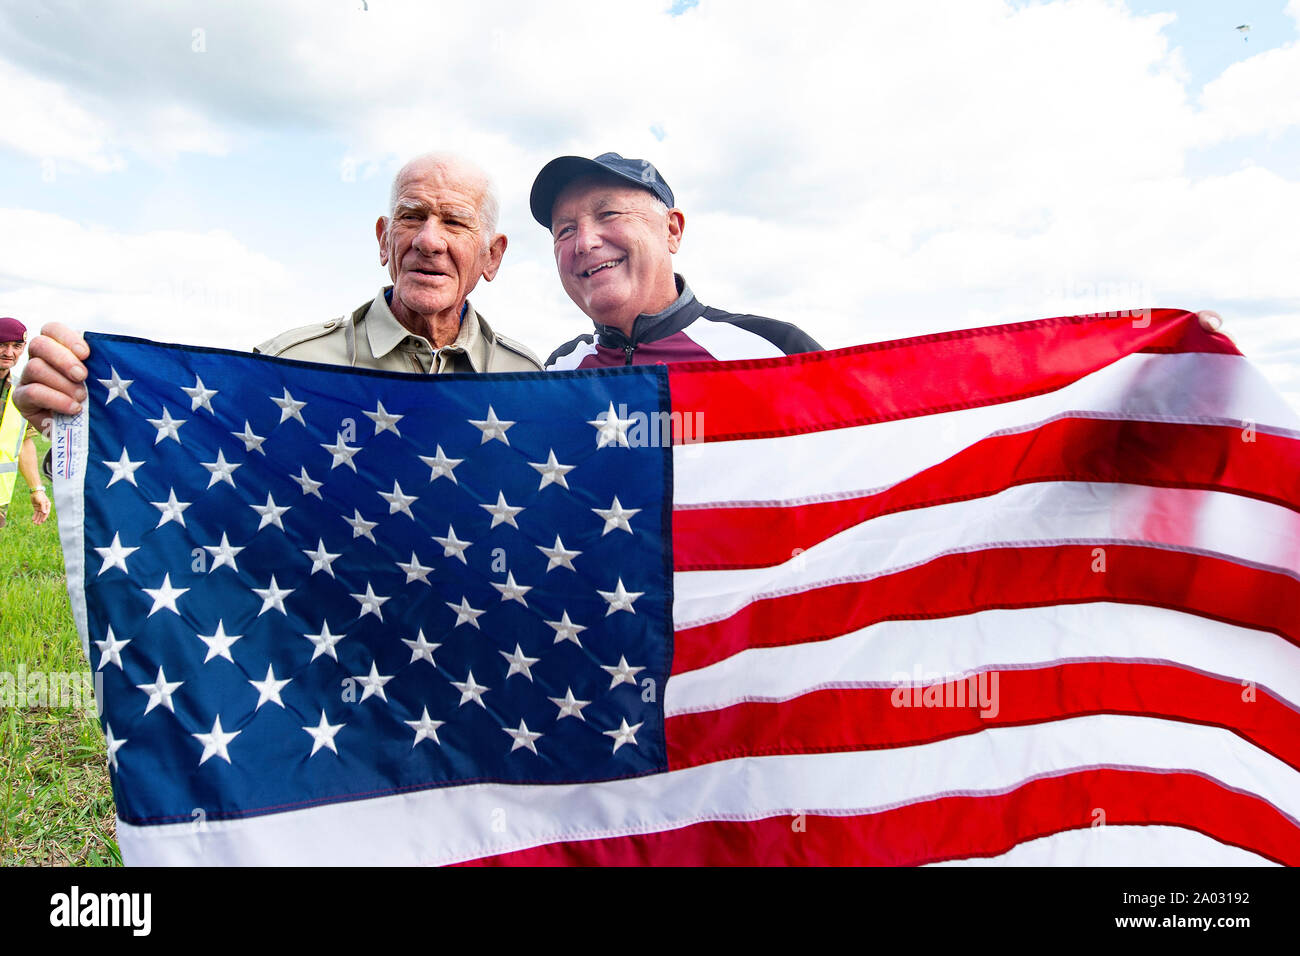 GROESBEEK 19-09-2019, dutchnews, parachute jump of mayor of Arnhem Ahmed Marcouch, US ambassador Pete Hoekstra and 89-old veteran Thomas Rice of the 501st Airborne division as part of 75th Airborne remembrance Stock Photo